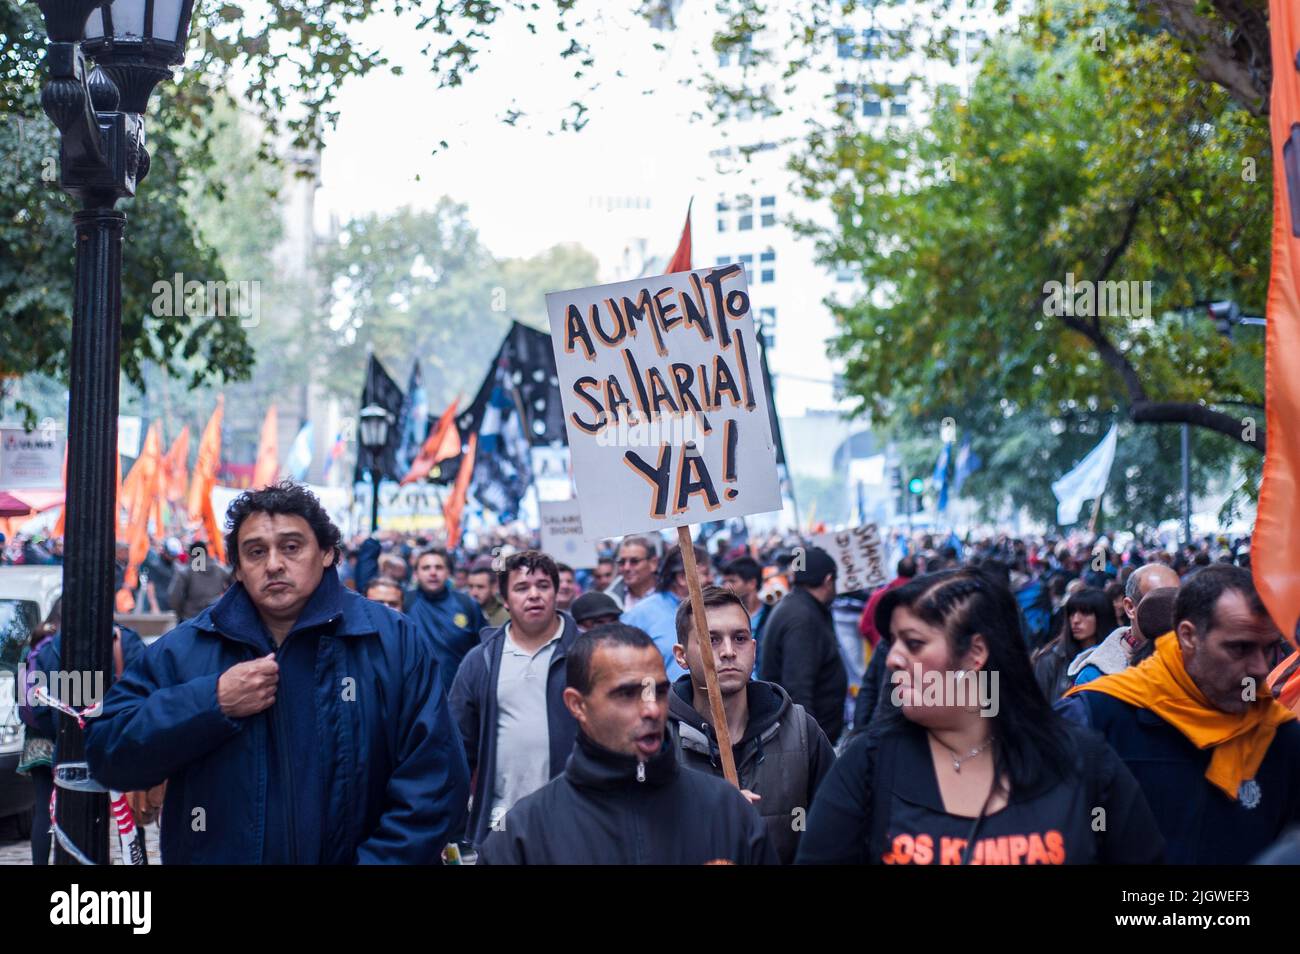 The Hispanic demonstrators with posters walking during the Workers' Day Rally in Buenos Aires, Argentina Stock Photo